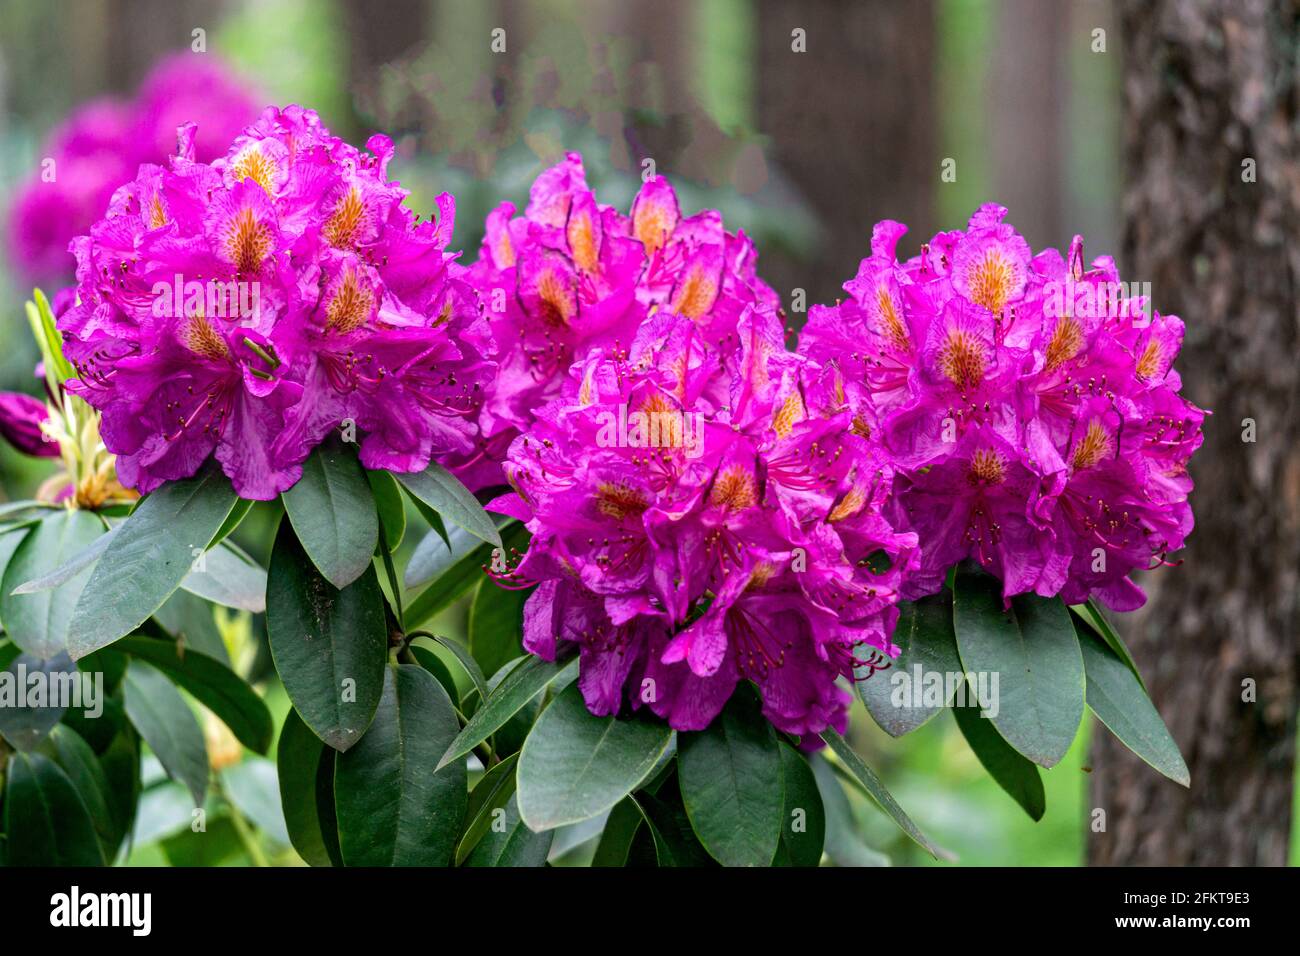 A rhododendron bush with lots of beautiful purple flowers. Stock Photo